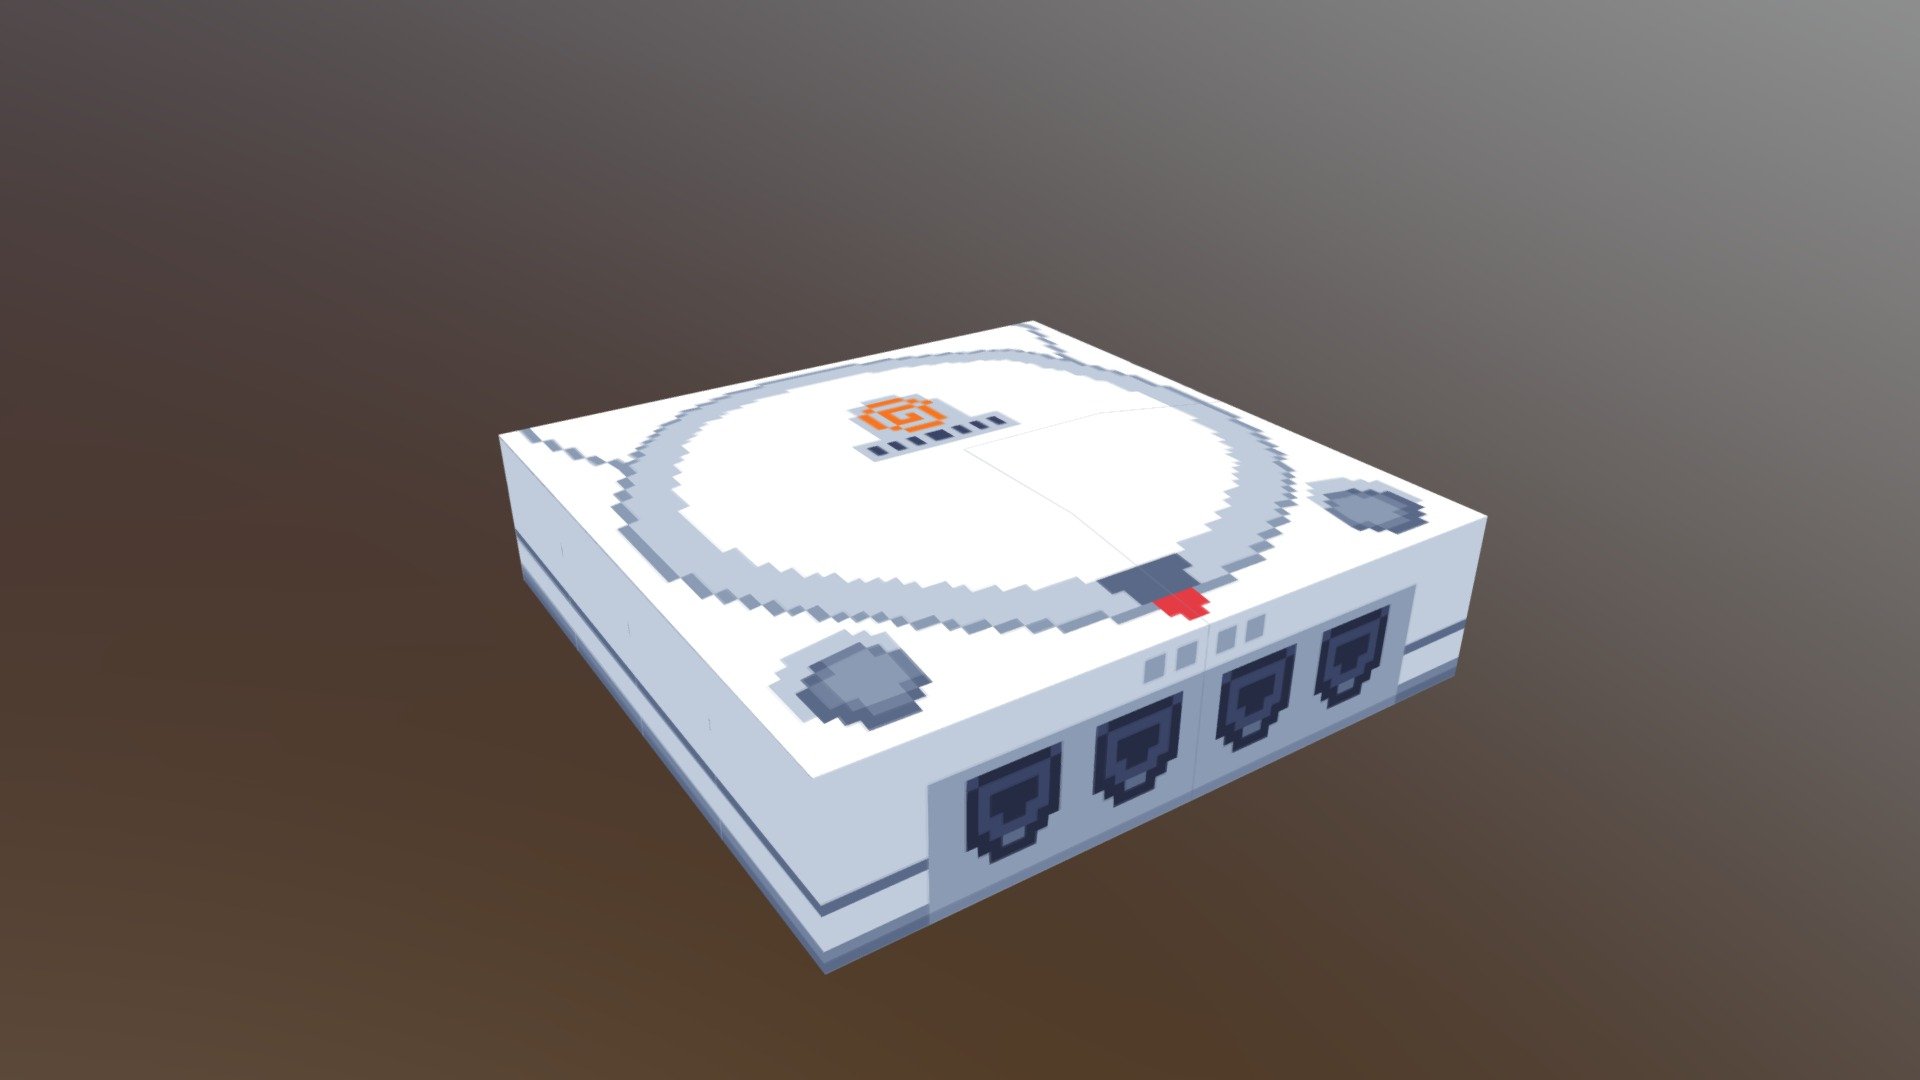 To celebrate the dreamcast's 20th Anniversary here's a lowpoly version done using blender and sprytile c: - Dreamcast - 3D model by Metarupx 3d model